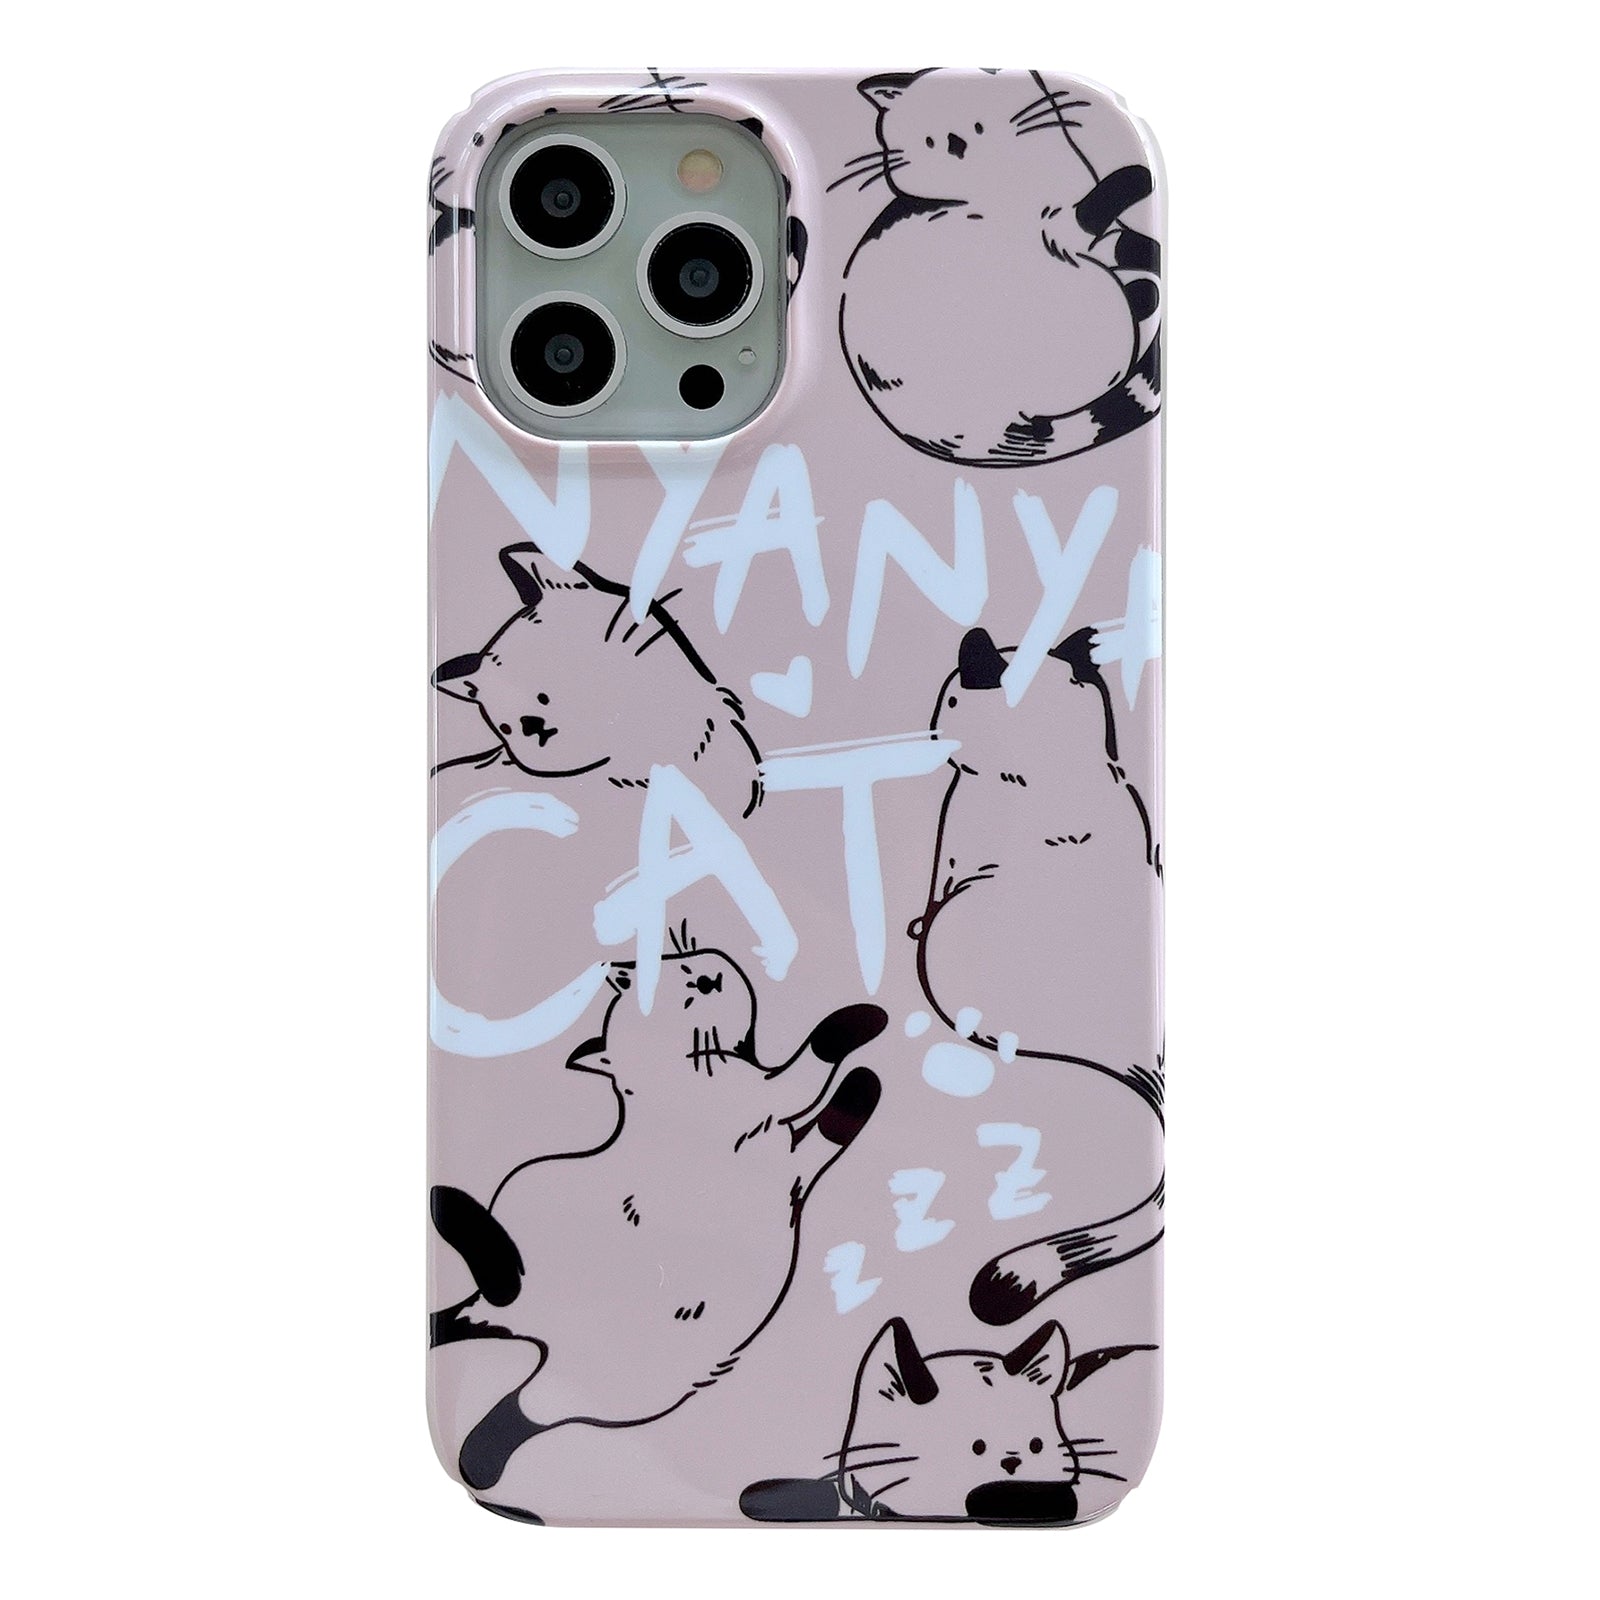 Uniqkart for iPhone 12 Pro Max 6.7 inch Hard PC Phone Case Pattern Printing Protective Glossy Phone Shell - Cat